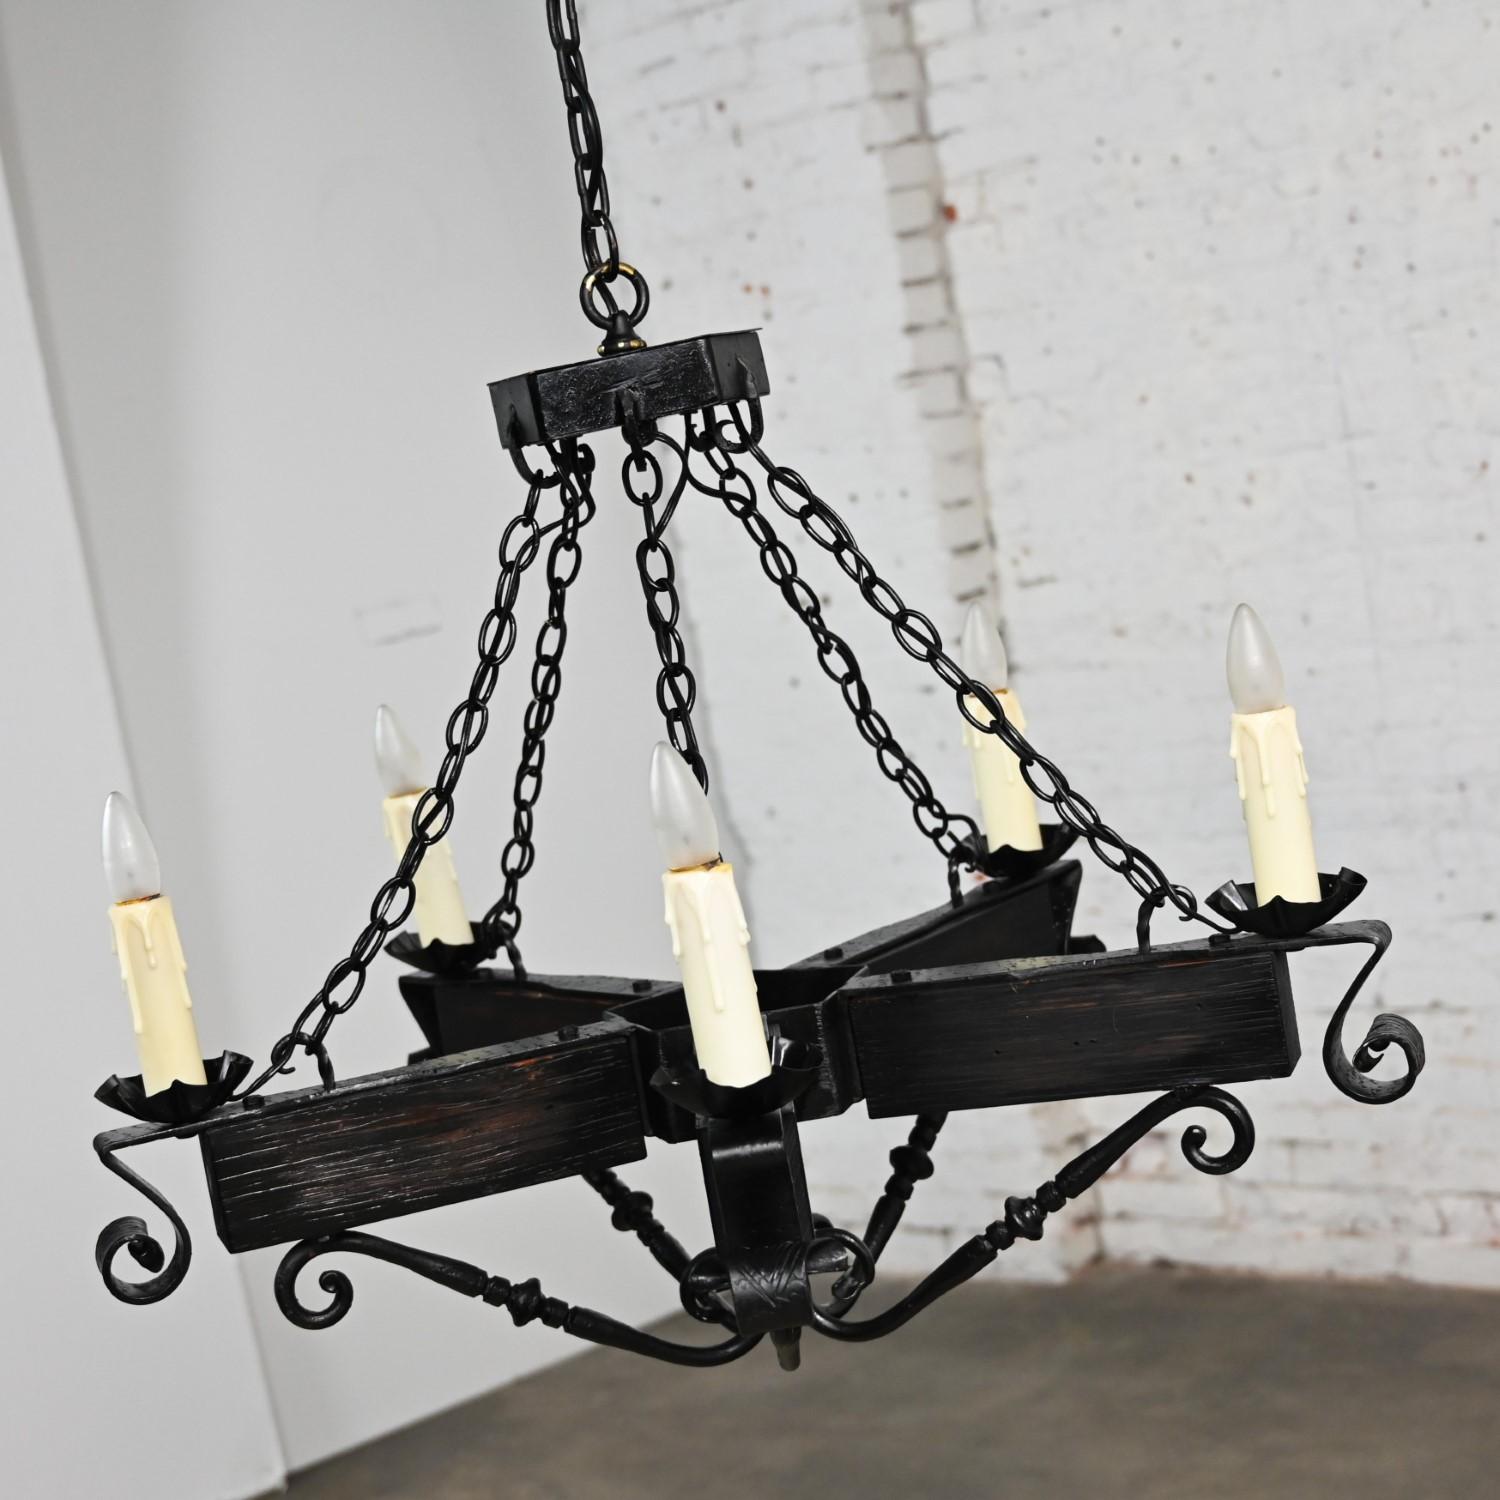 John C Virden Medieval Gothic or Spanish Revival Style Hanging Light Fixture  For Sale 1